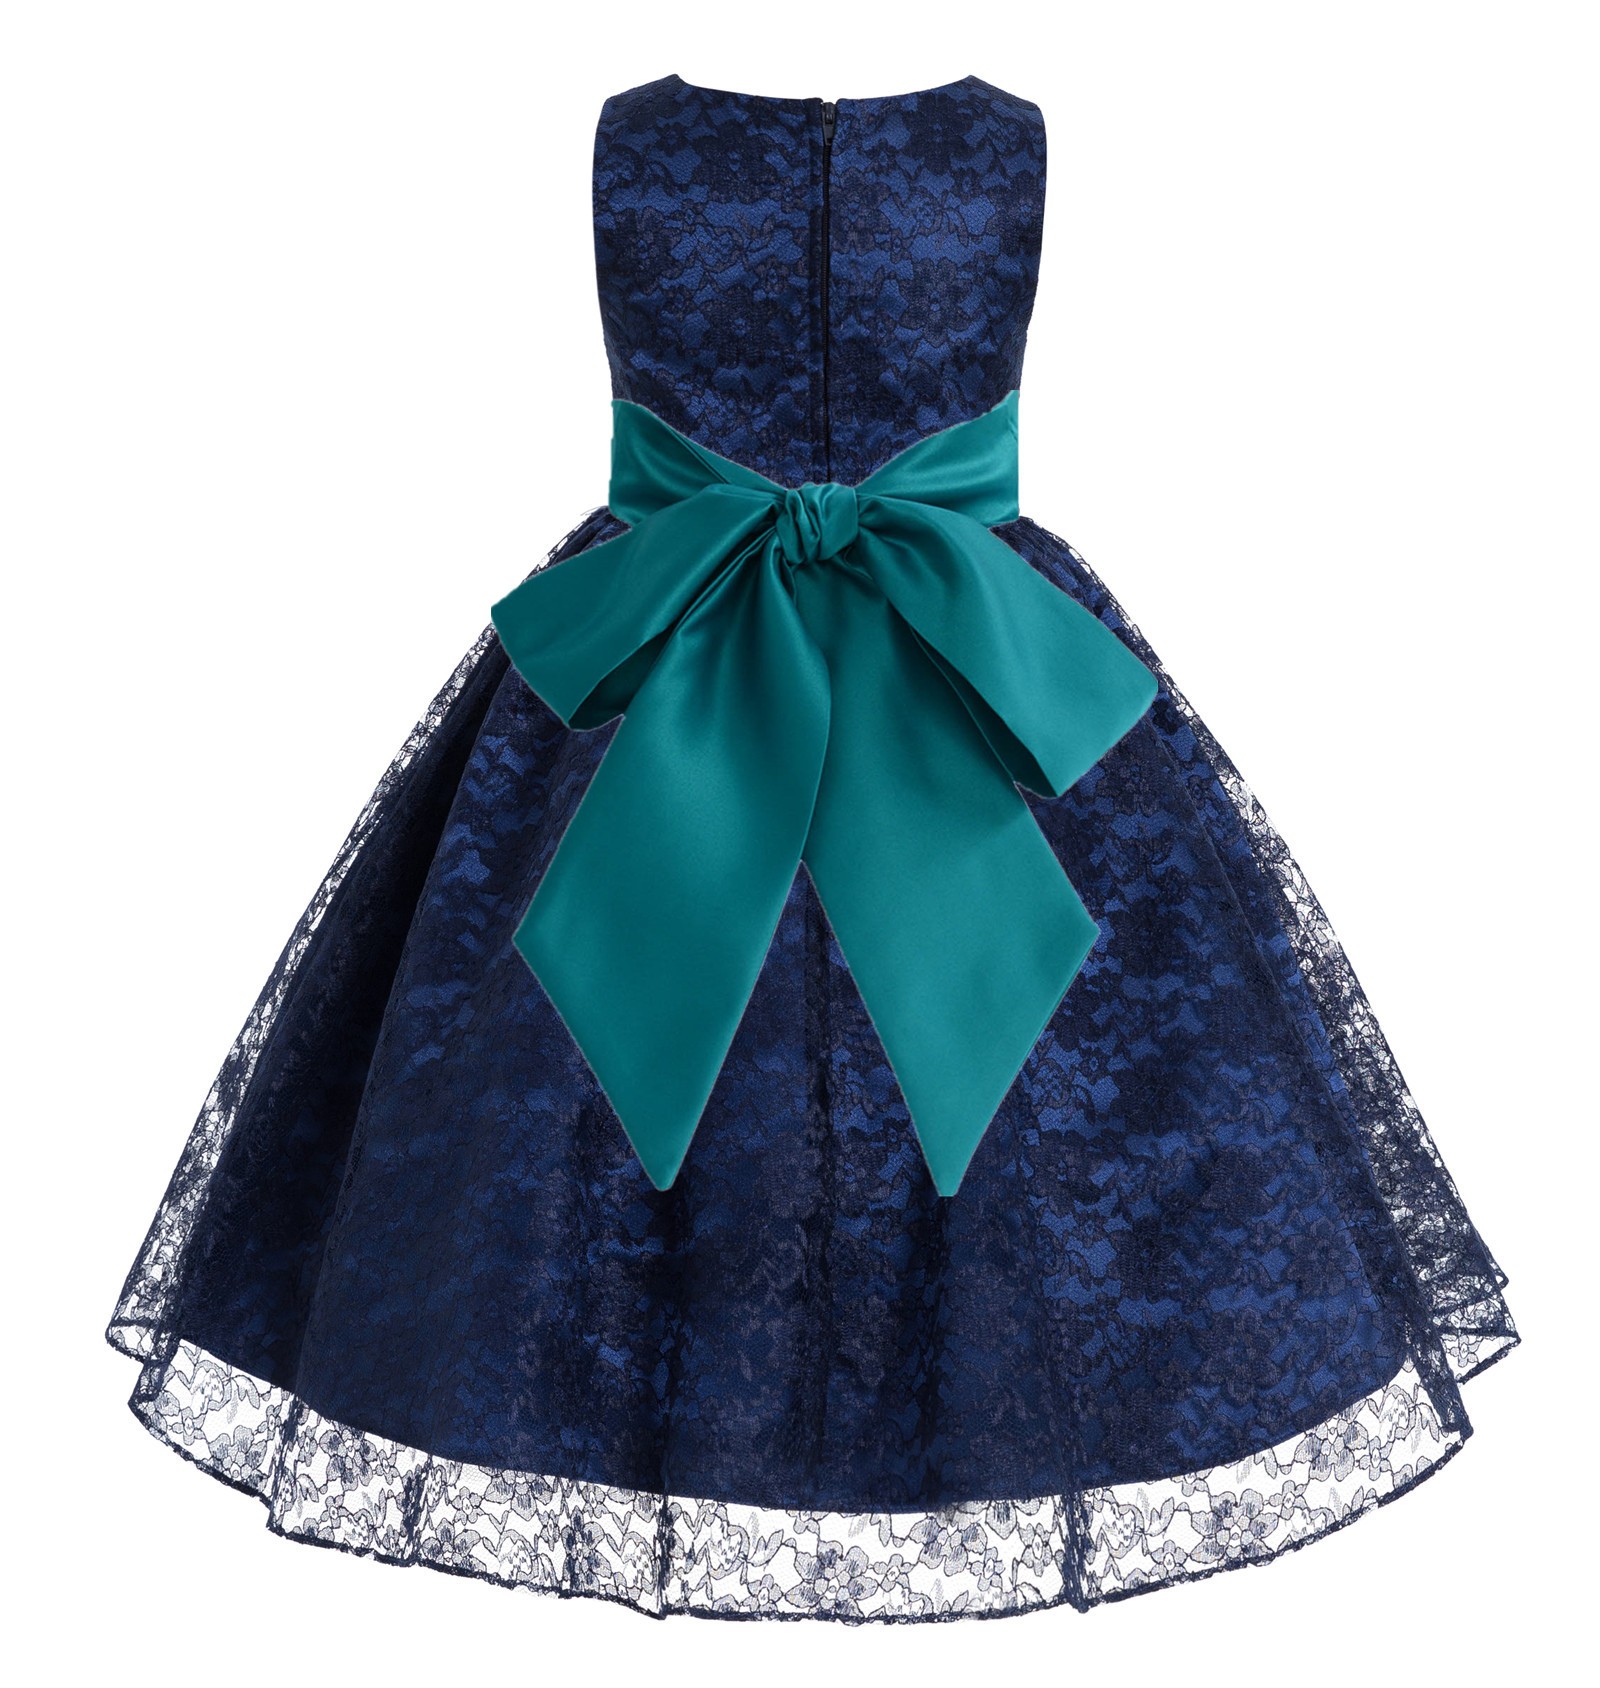 Navy / Oasis Floral Lace Overlay Flower Girl Dress Lace Dresses 163s